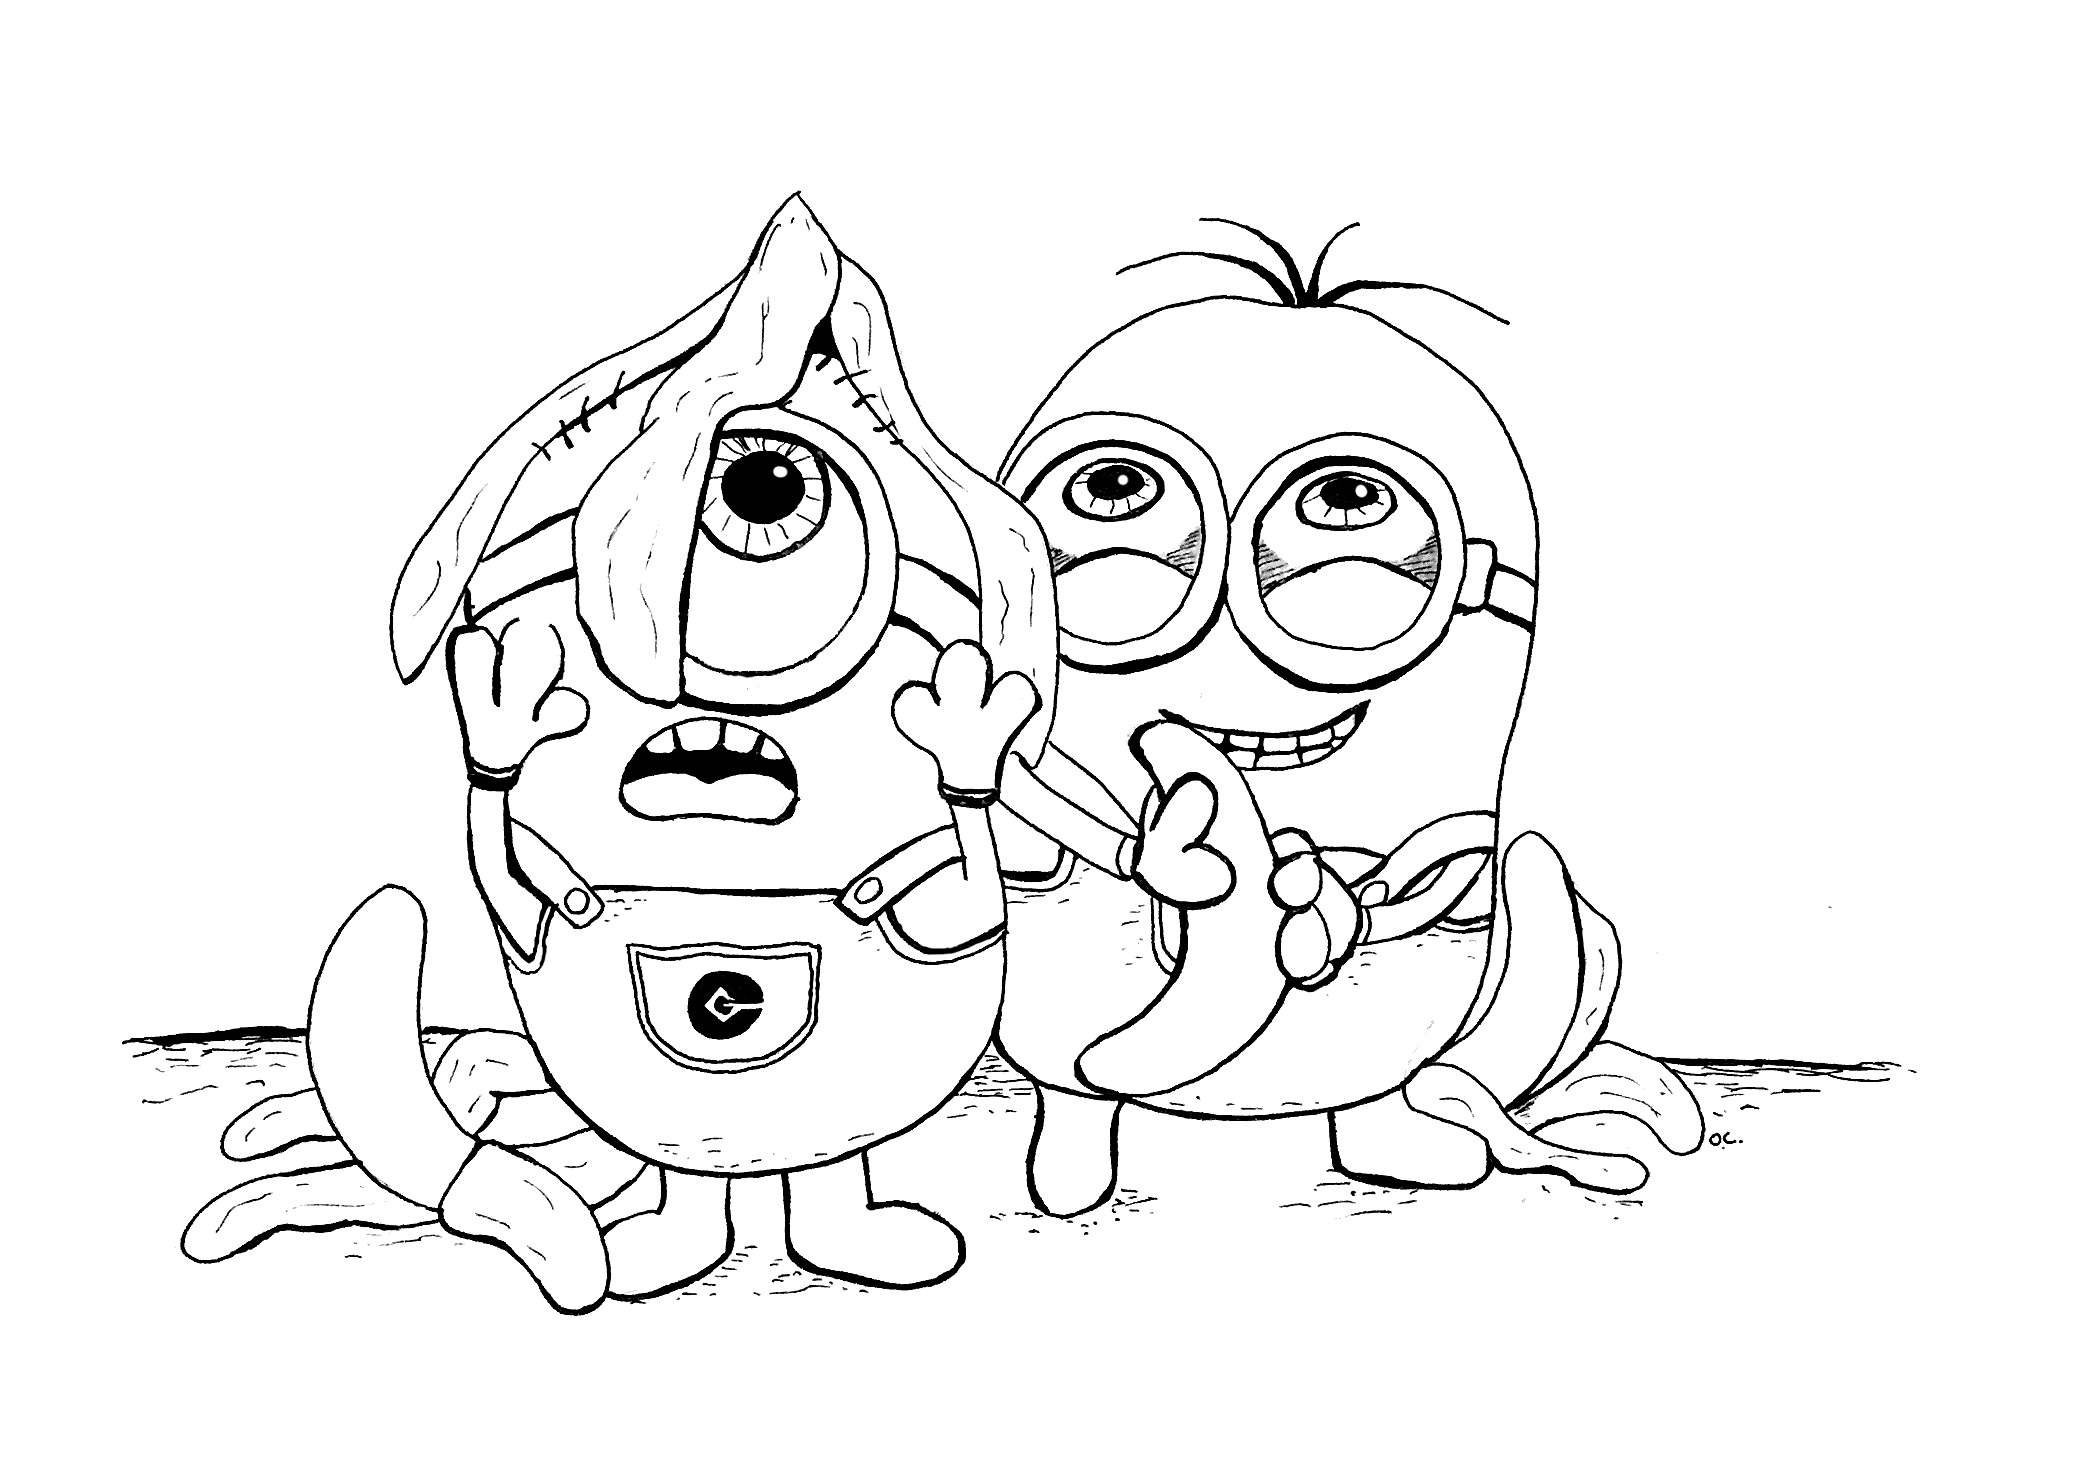 Coloring of two Minions with bananas